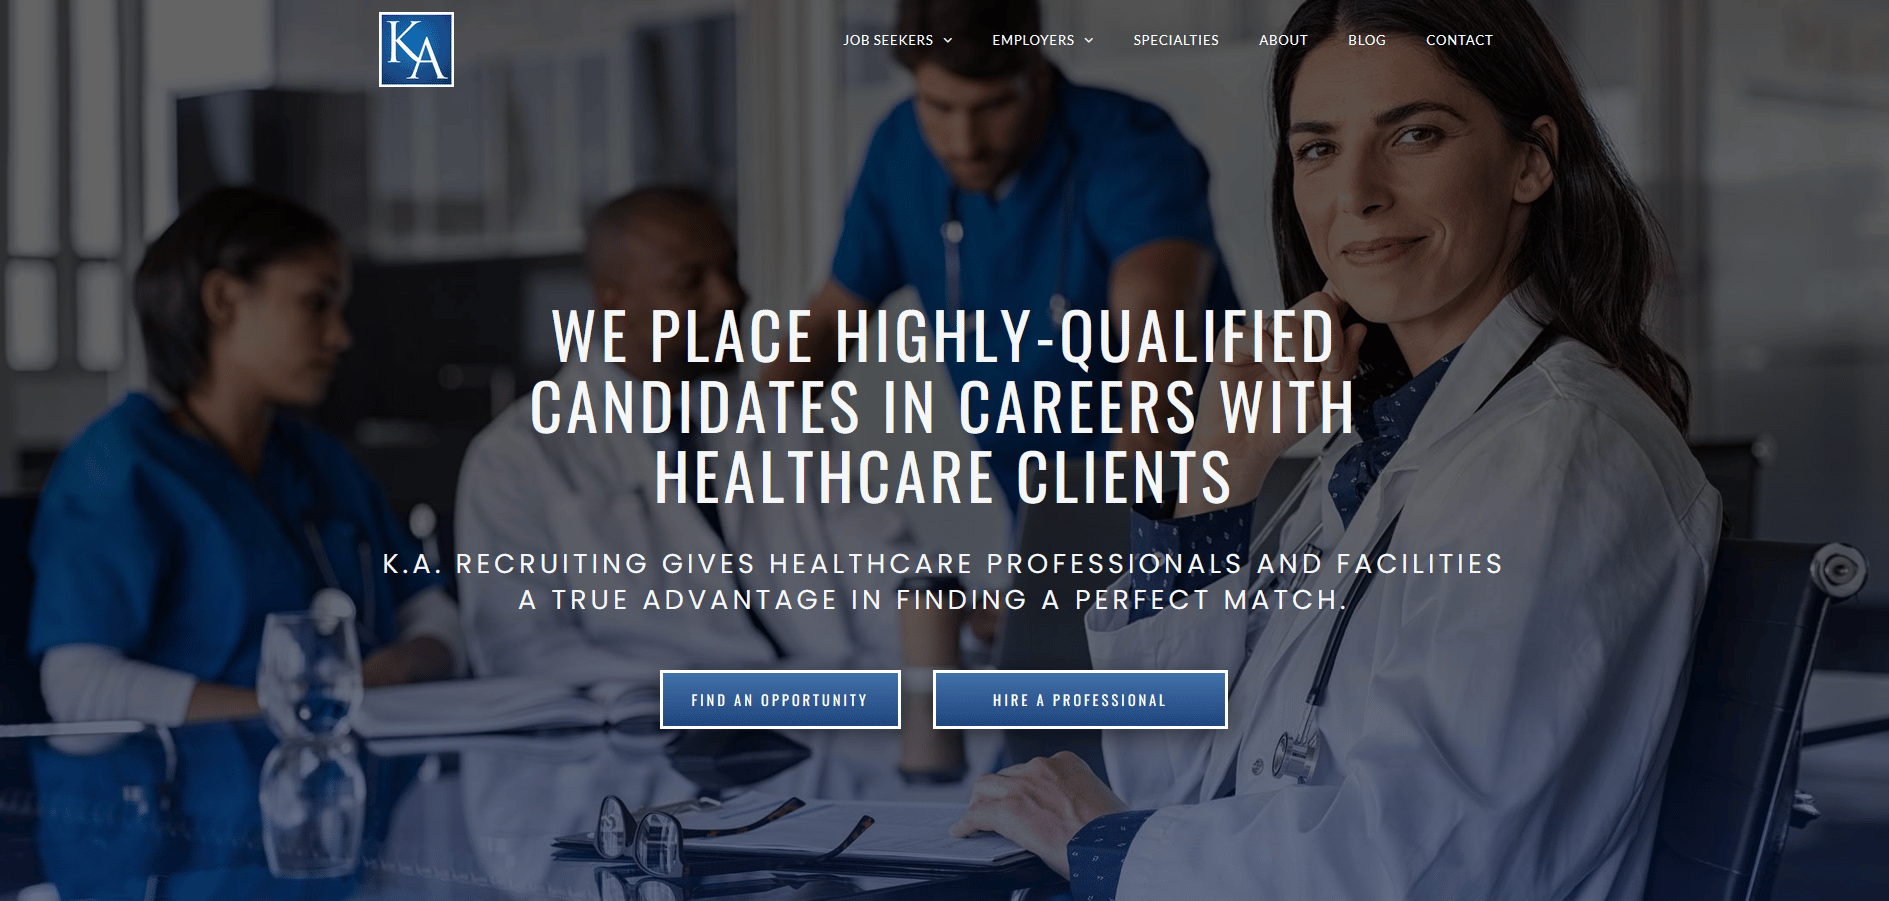 K.A. Recruiting’s New Website Helps Connect Both Candidates and Clients